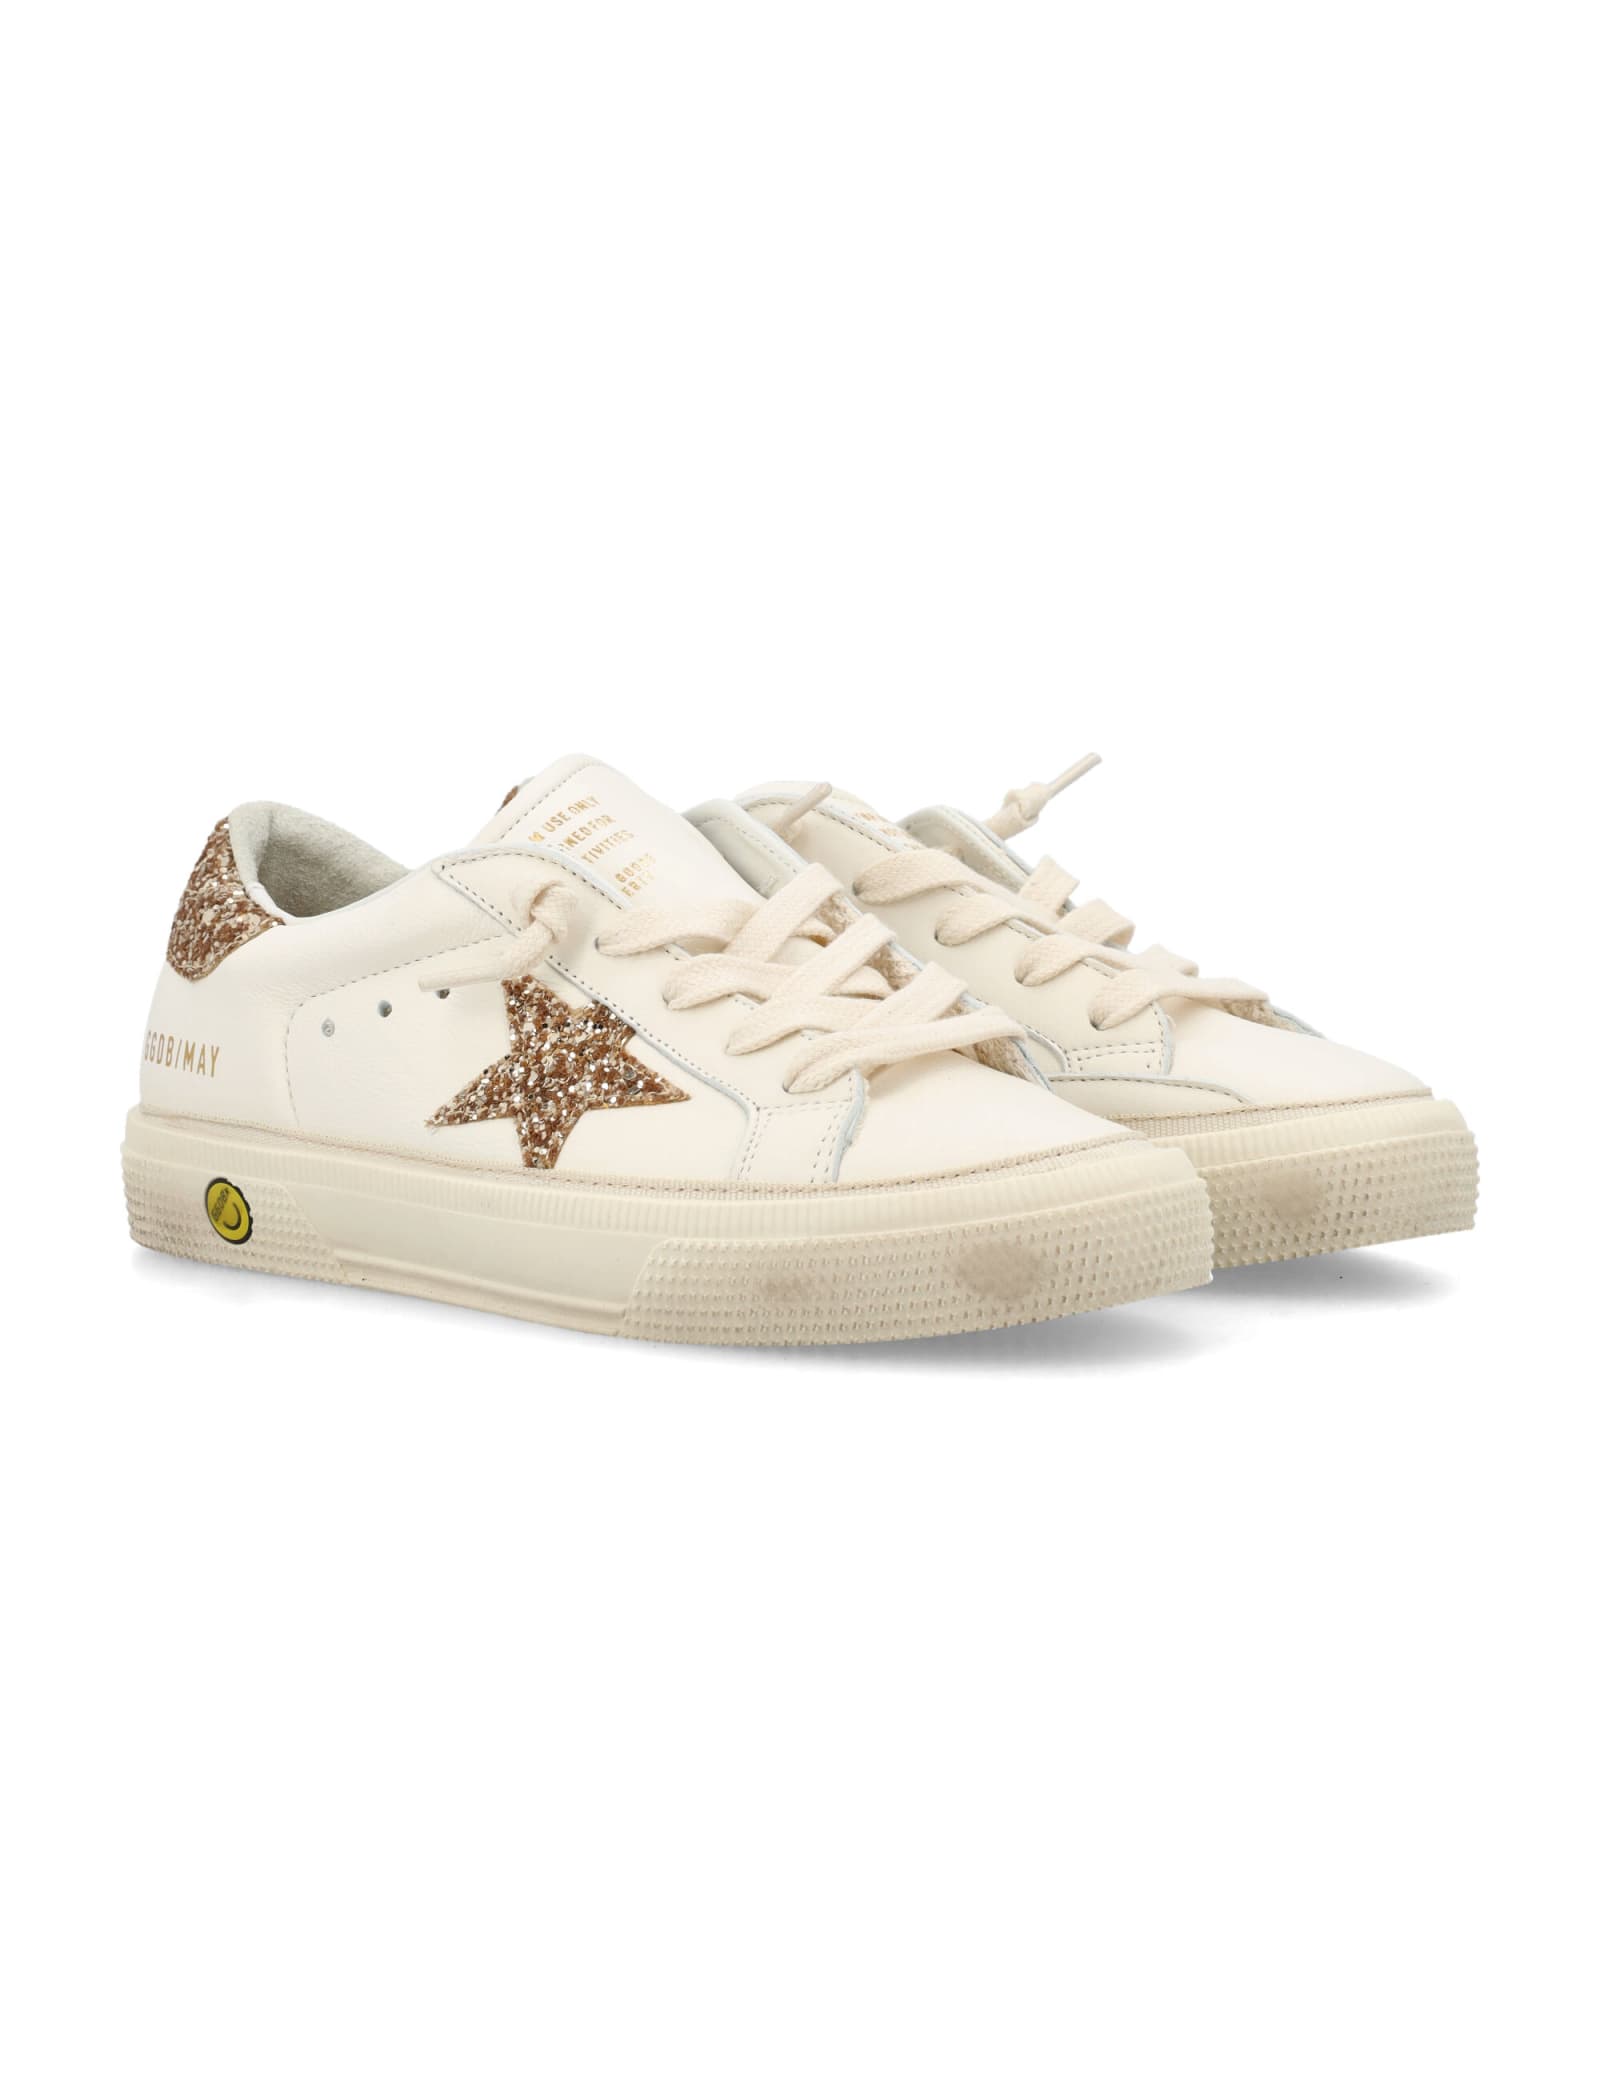 Shop Golden Goose May Sneakers In White/gold